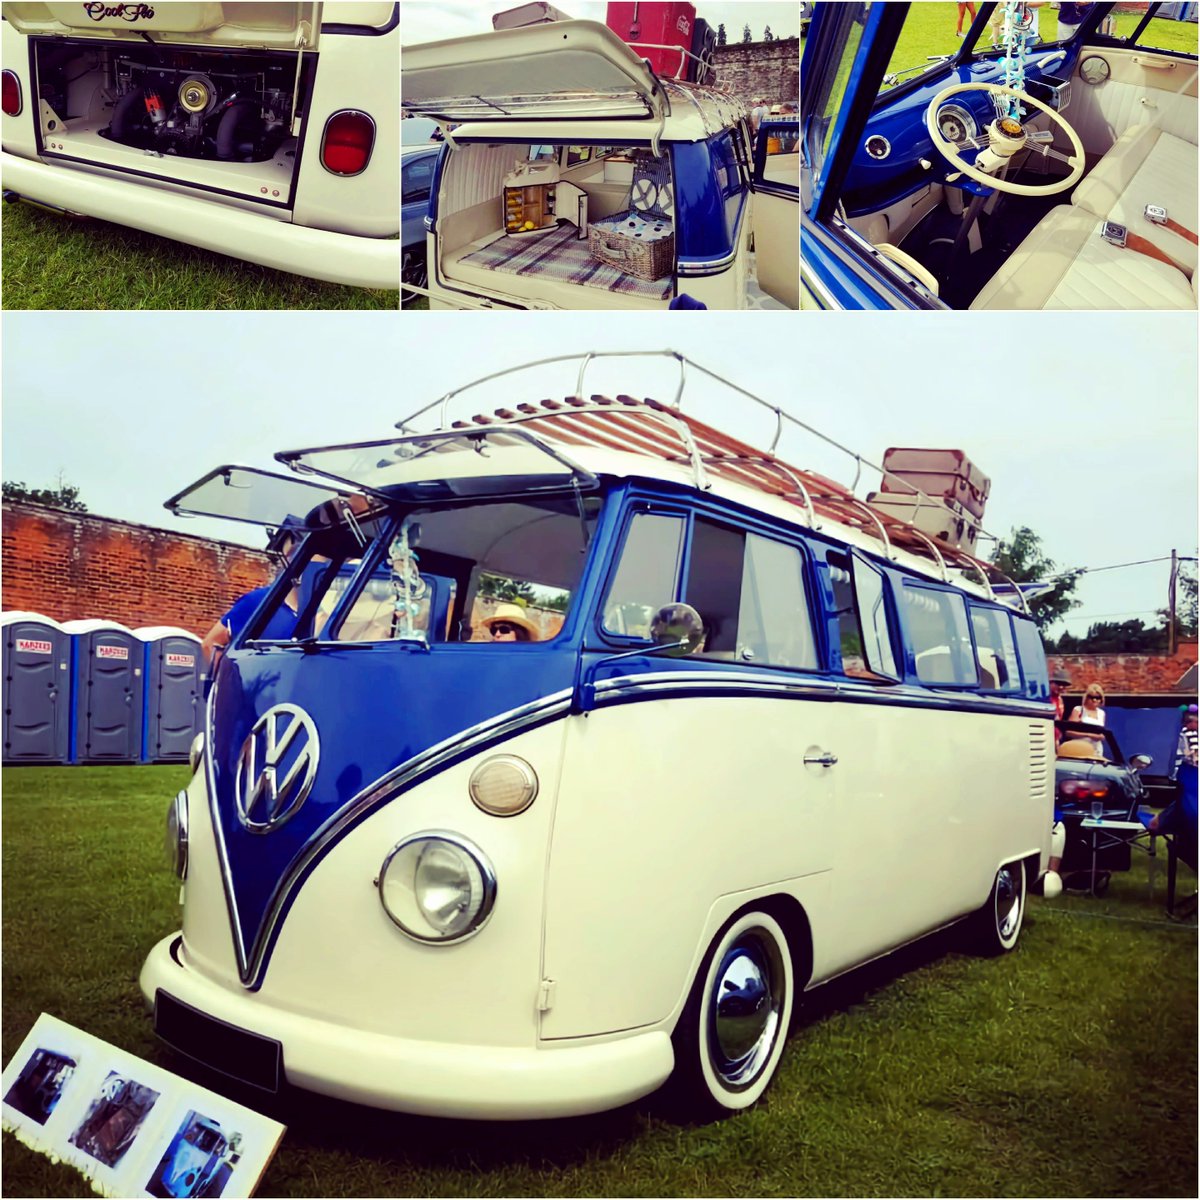 Check out this stunning build spotted by #CampervanFan James Muscle at a car show! Who else is in awe of this beauty? 😍 #VanLifeGoals